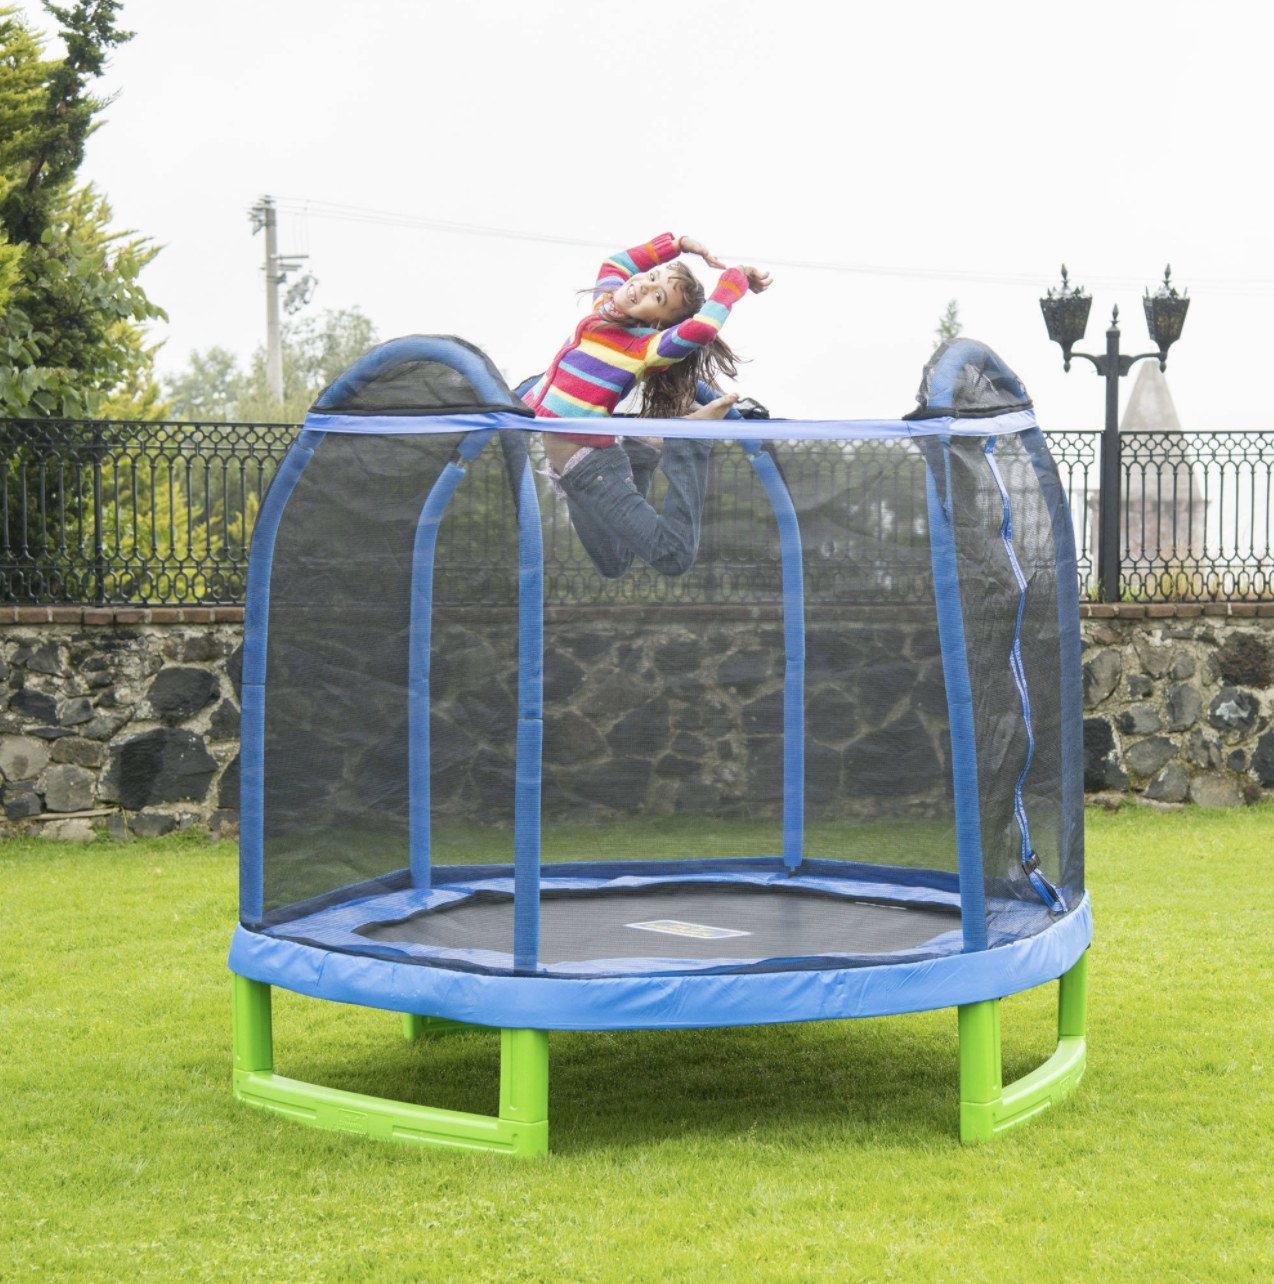 The trampoline has a blue frame and black netting and green sturdy bottom with a child jumping at the top